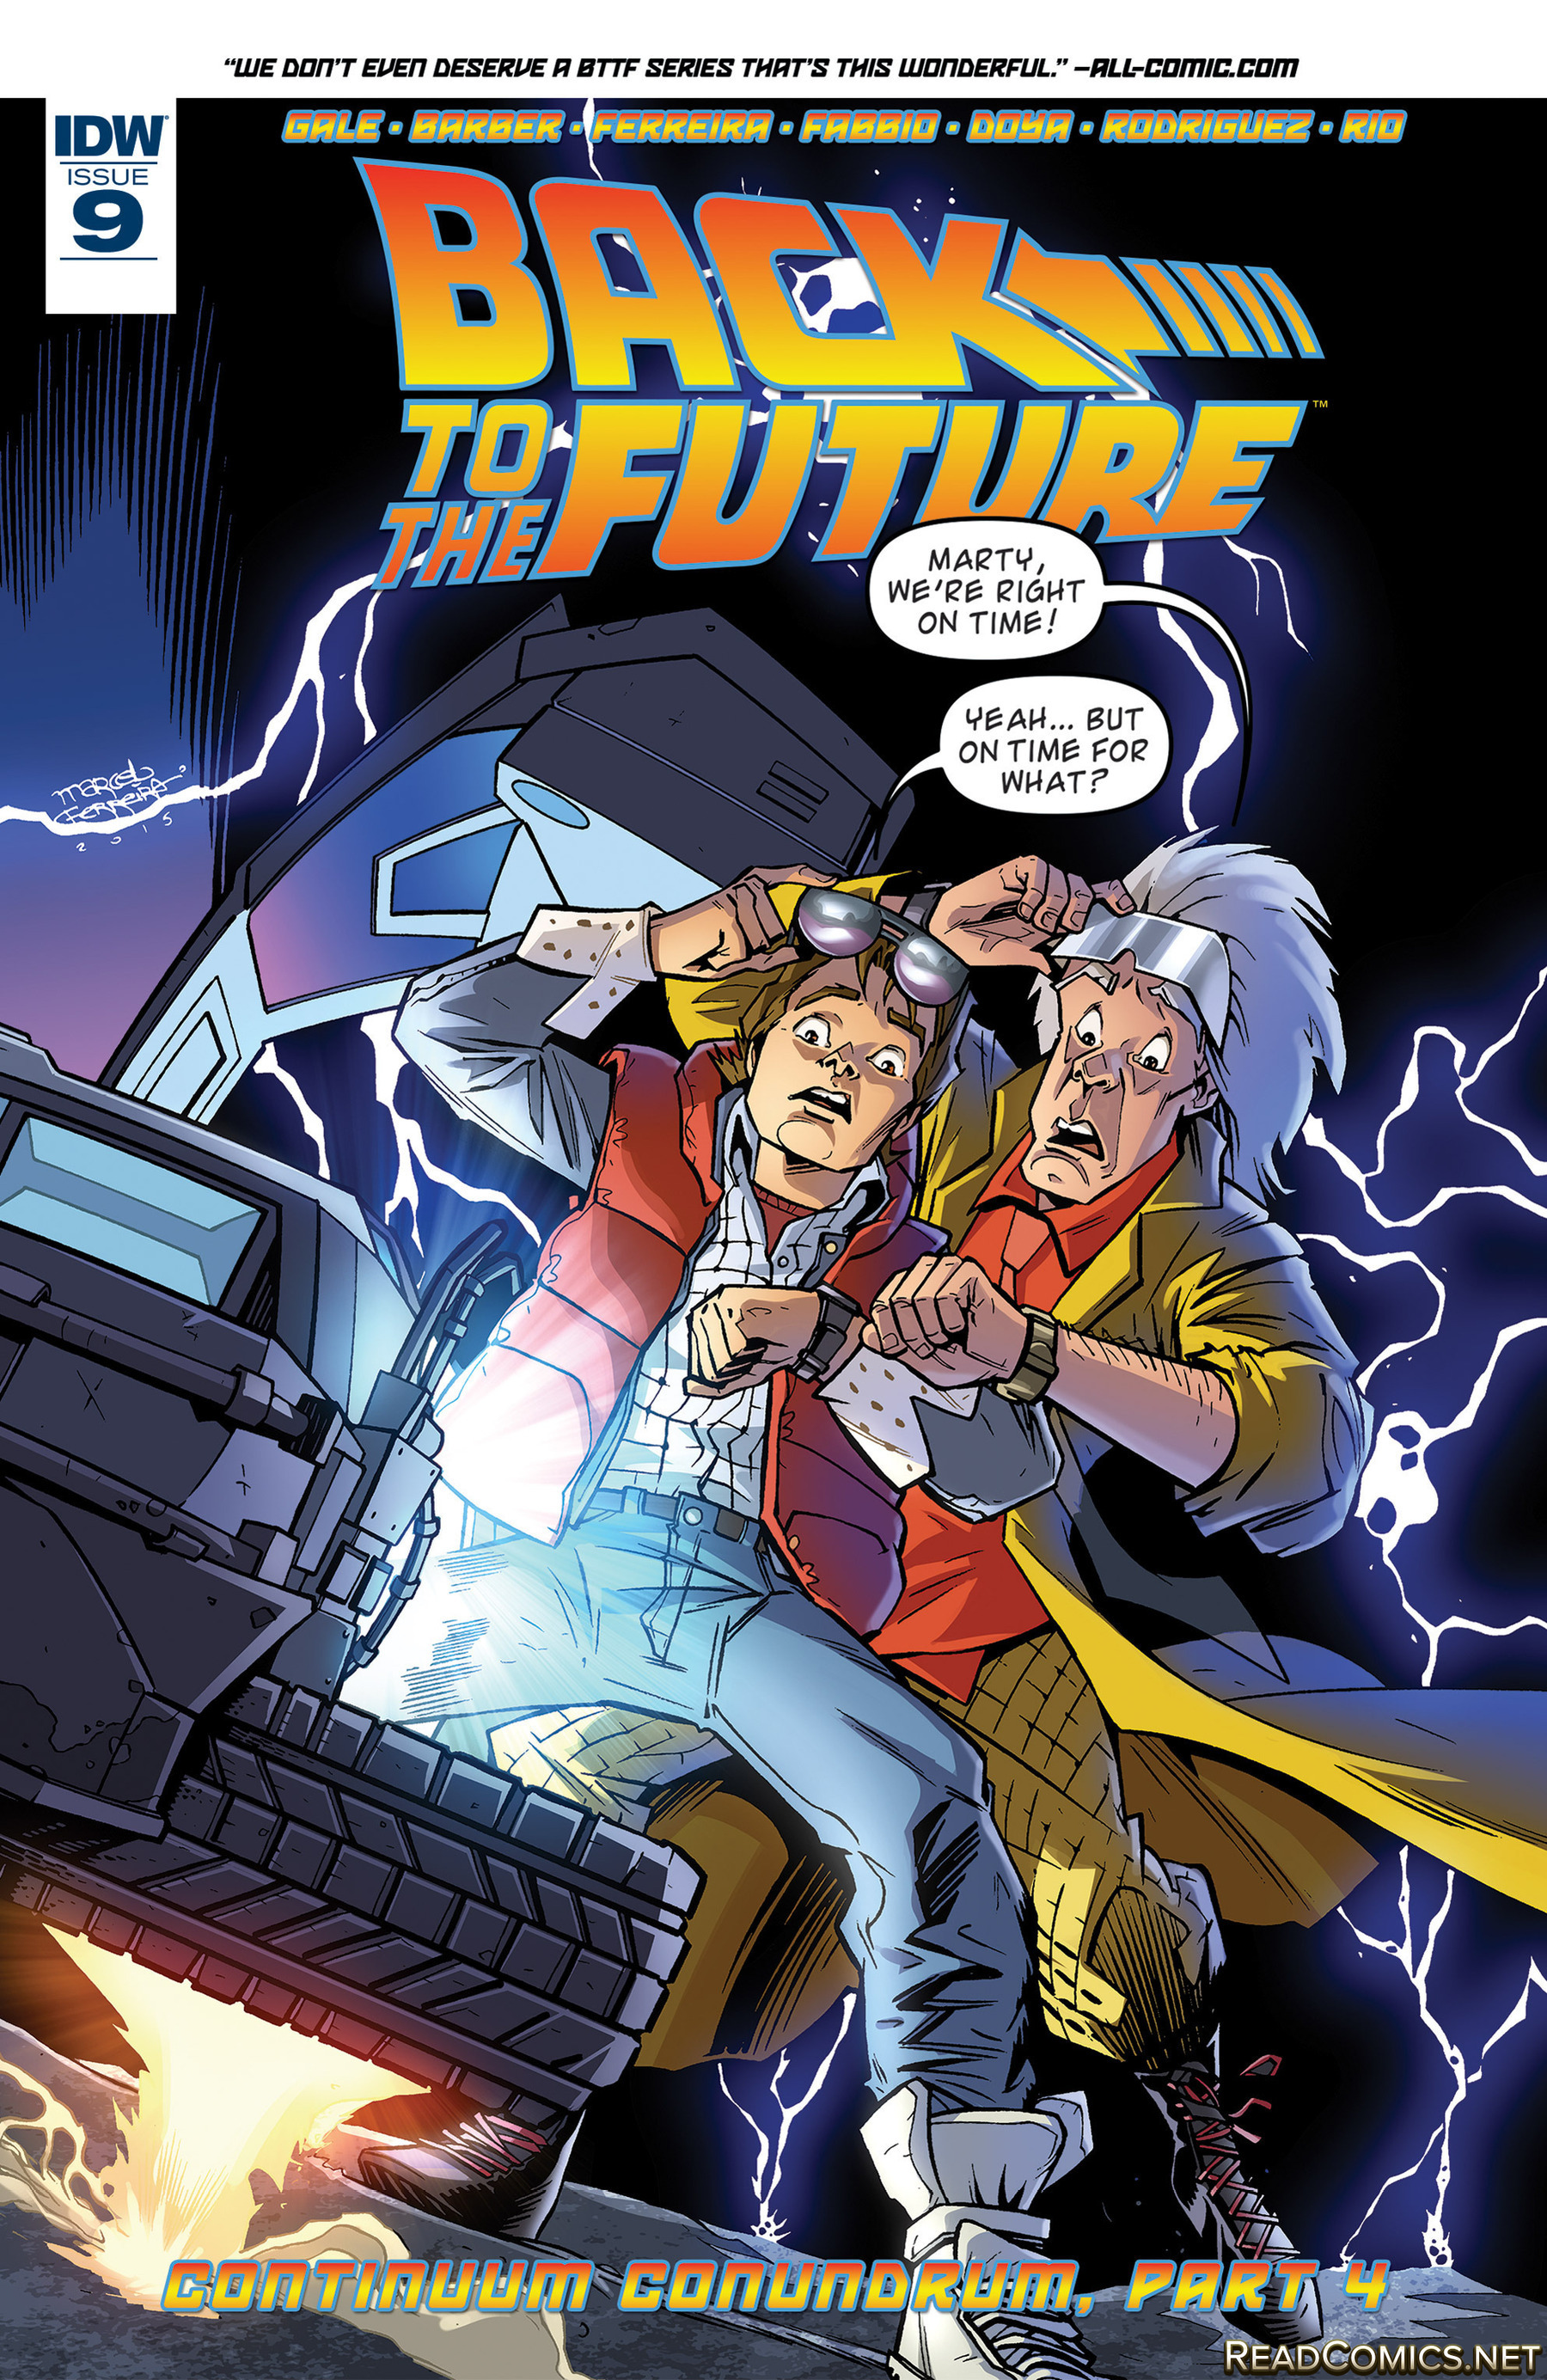 Back To the Future (2015-): Chapter 9 - Page 1